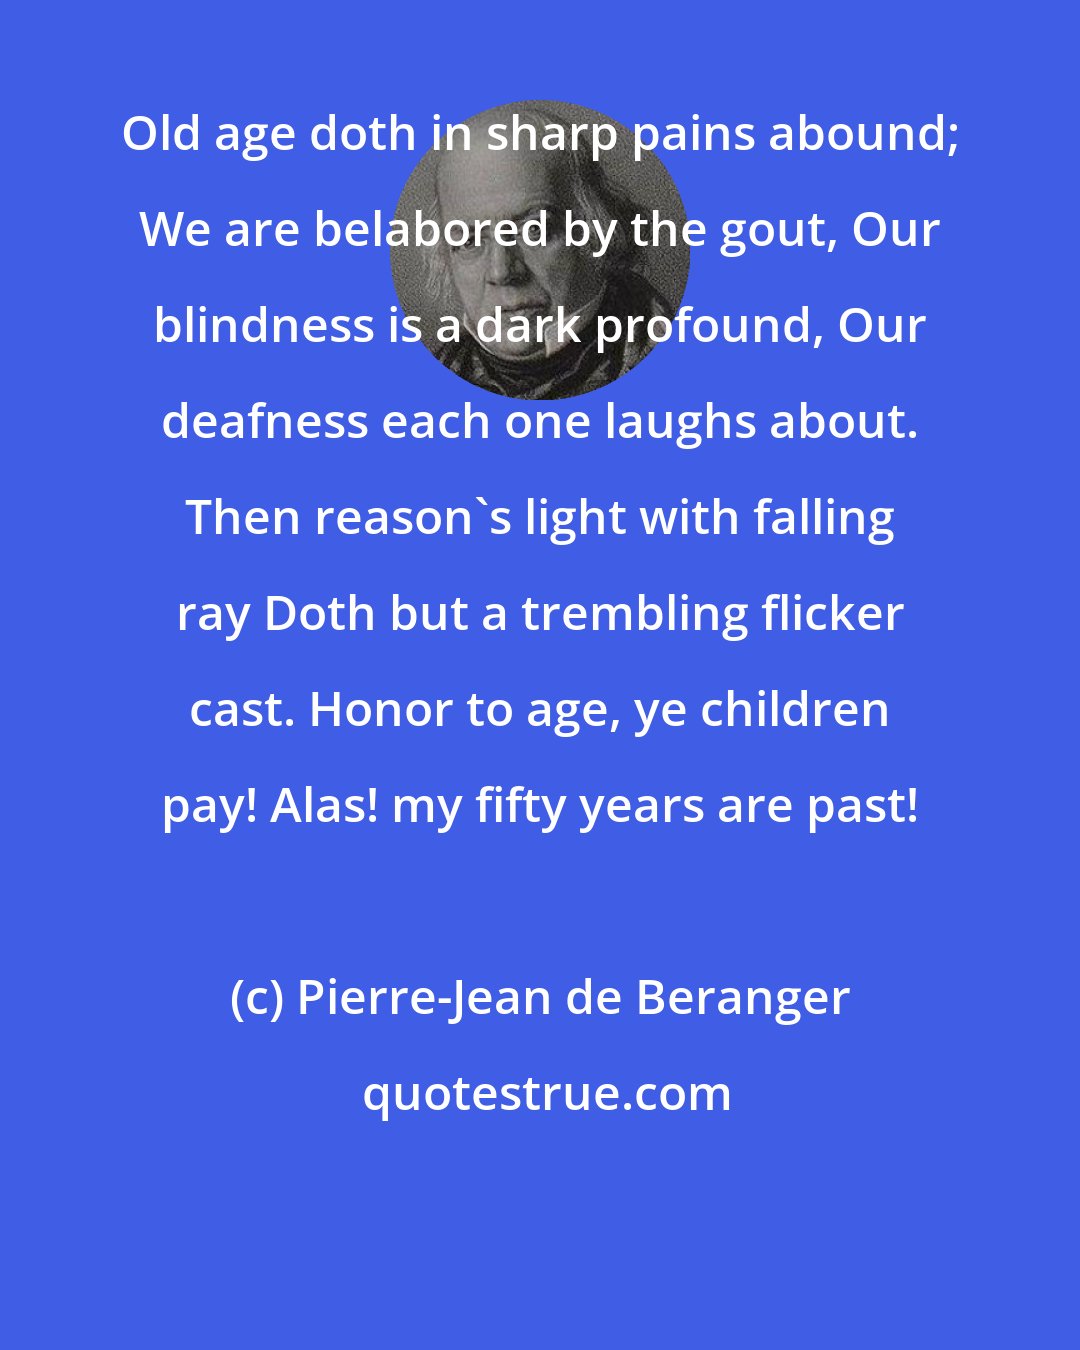 Pierre-Jean de Beranger: Old age doth in sharp pains abound; We are belabored by the gout, Our blindness is a dark profound, Our deafness each one laughs about. Then reason's light with falling ray Doth but a trembling flicker cast. Honor to age, ye children pay! Alas! my fifty years are past!